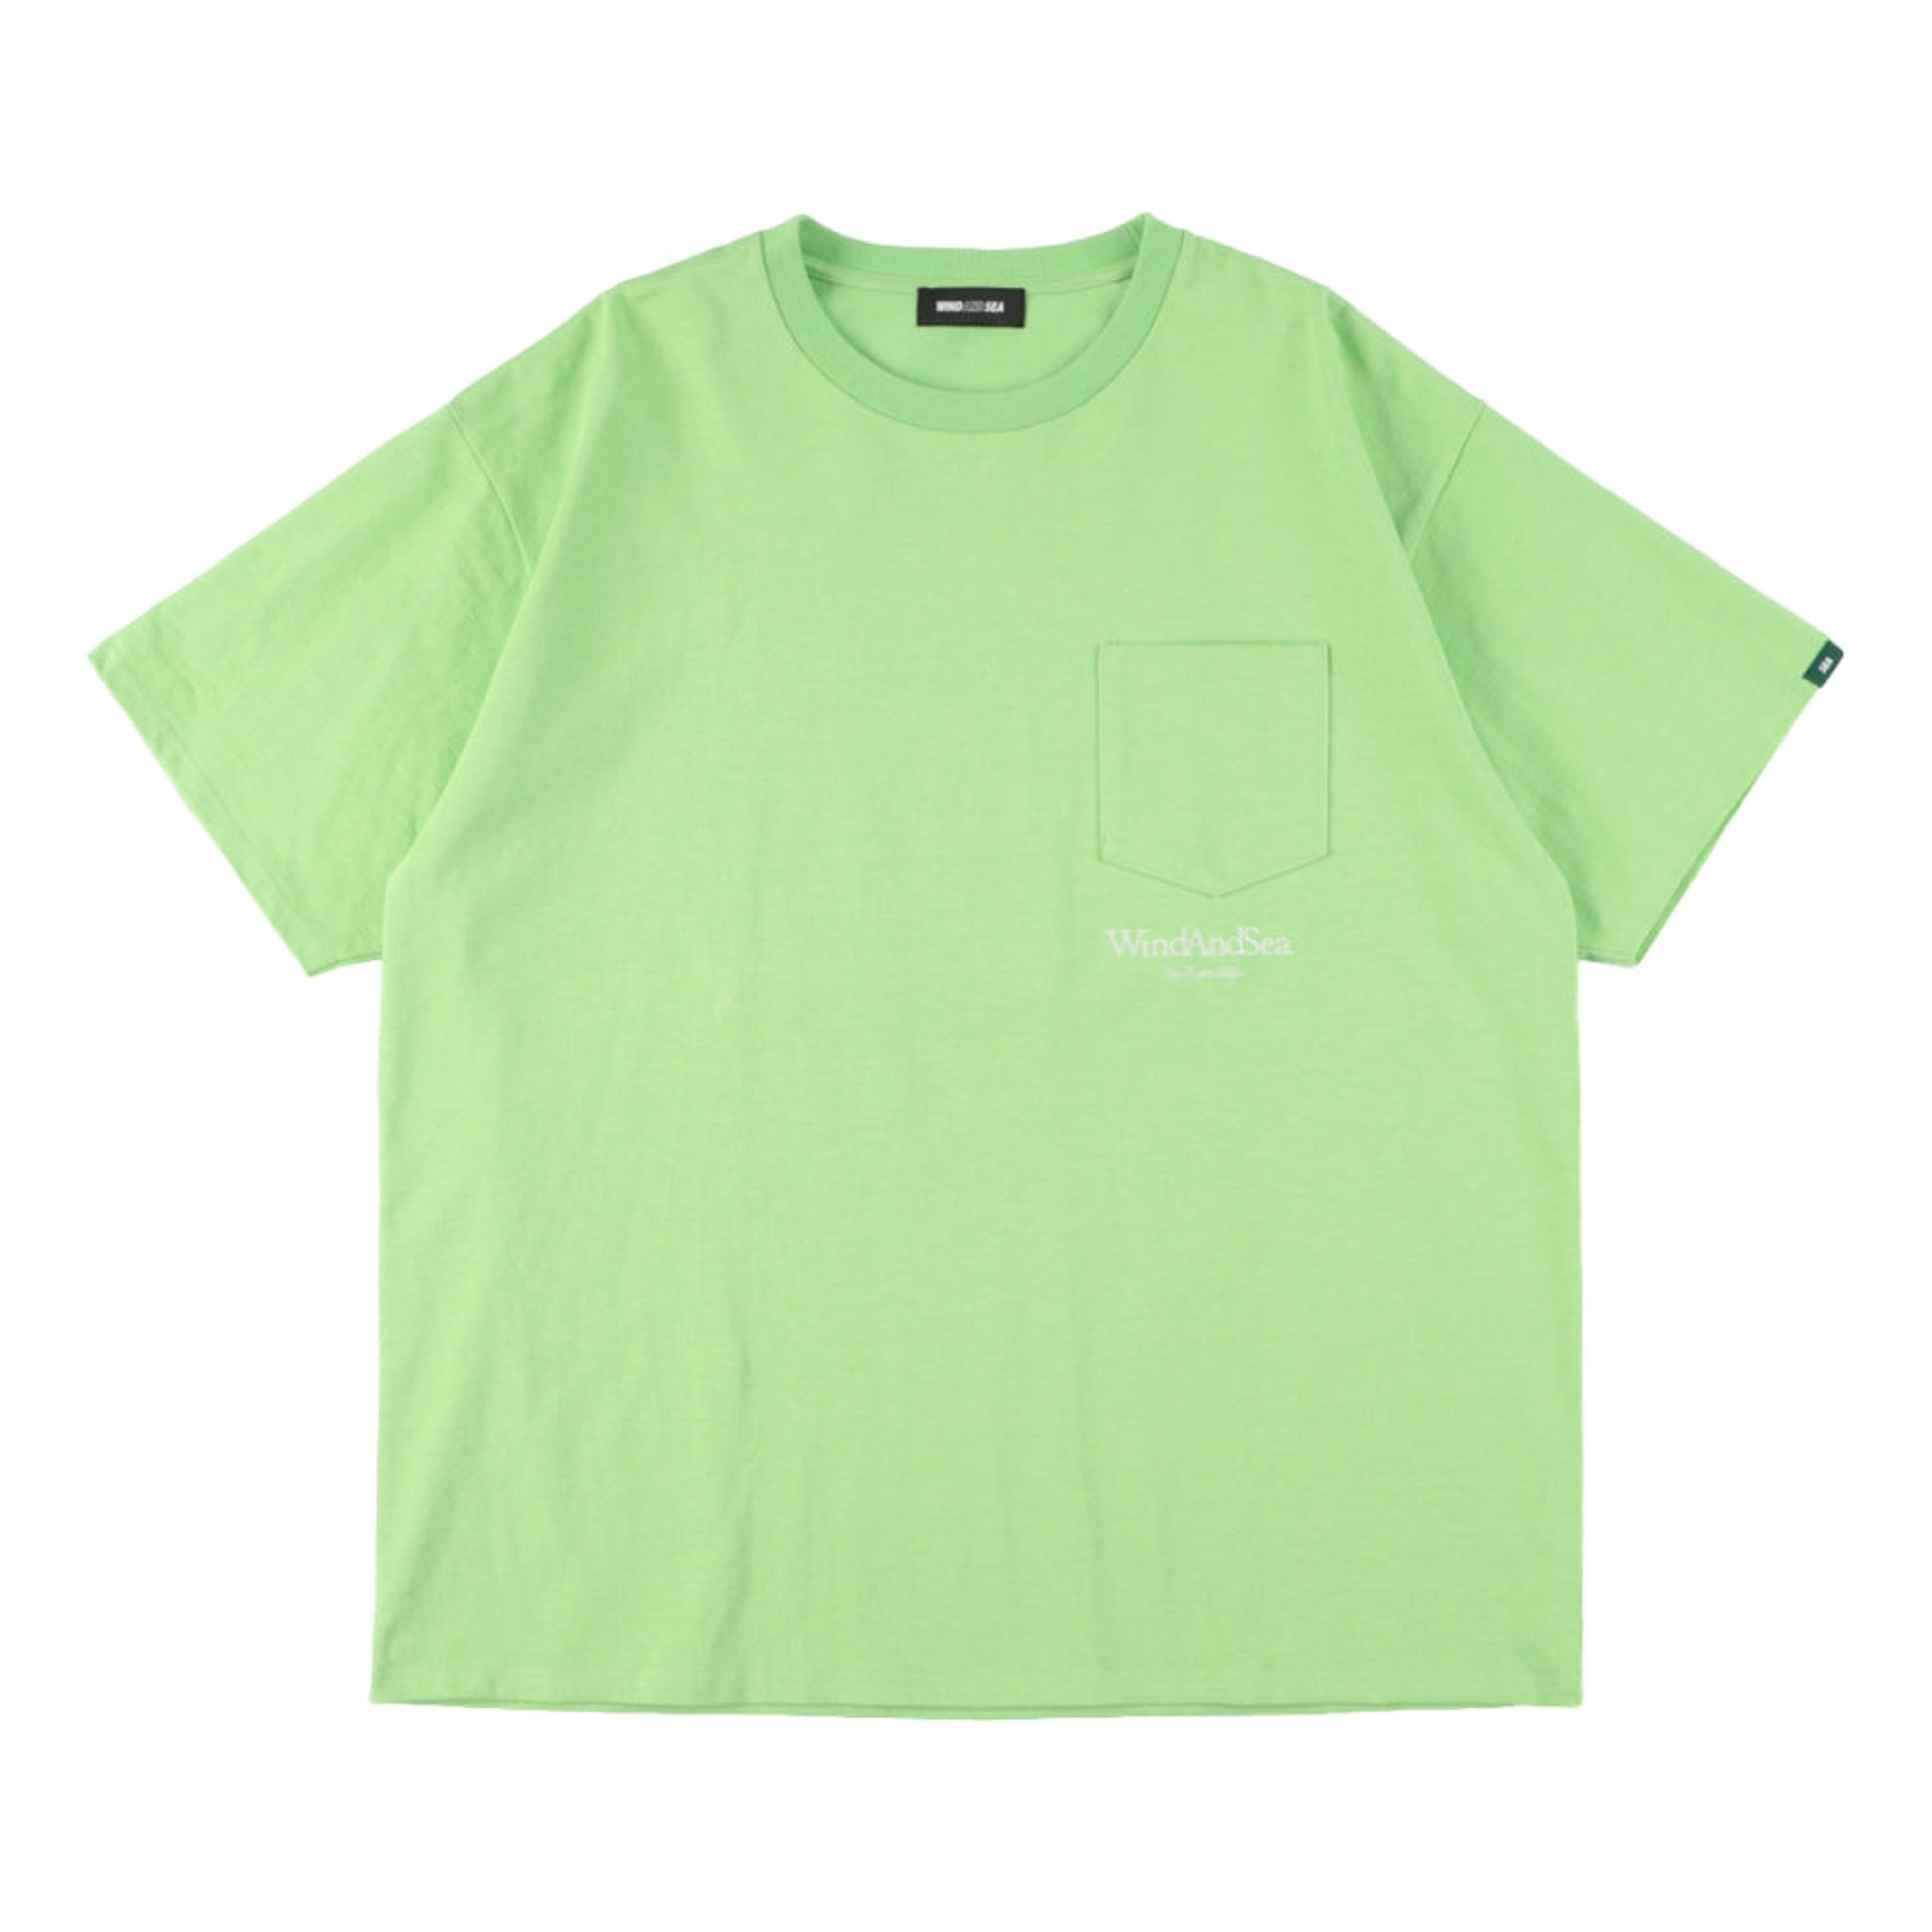 NTWRK - WIND AND SEA SDT COLOR POCKET S/S TEE-GREEN